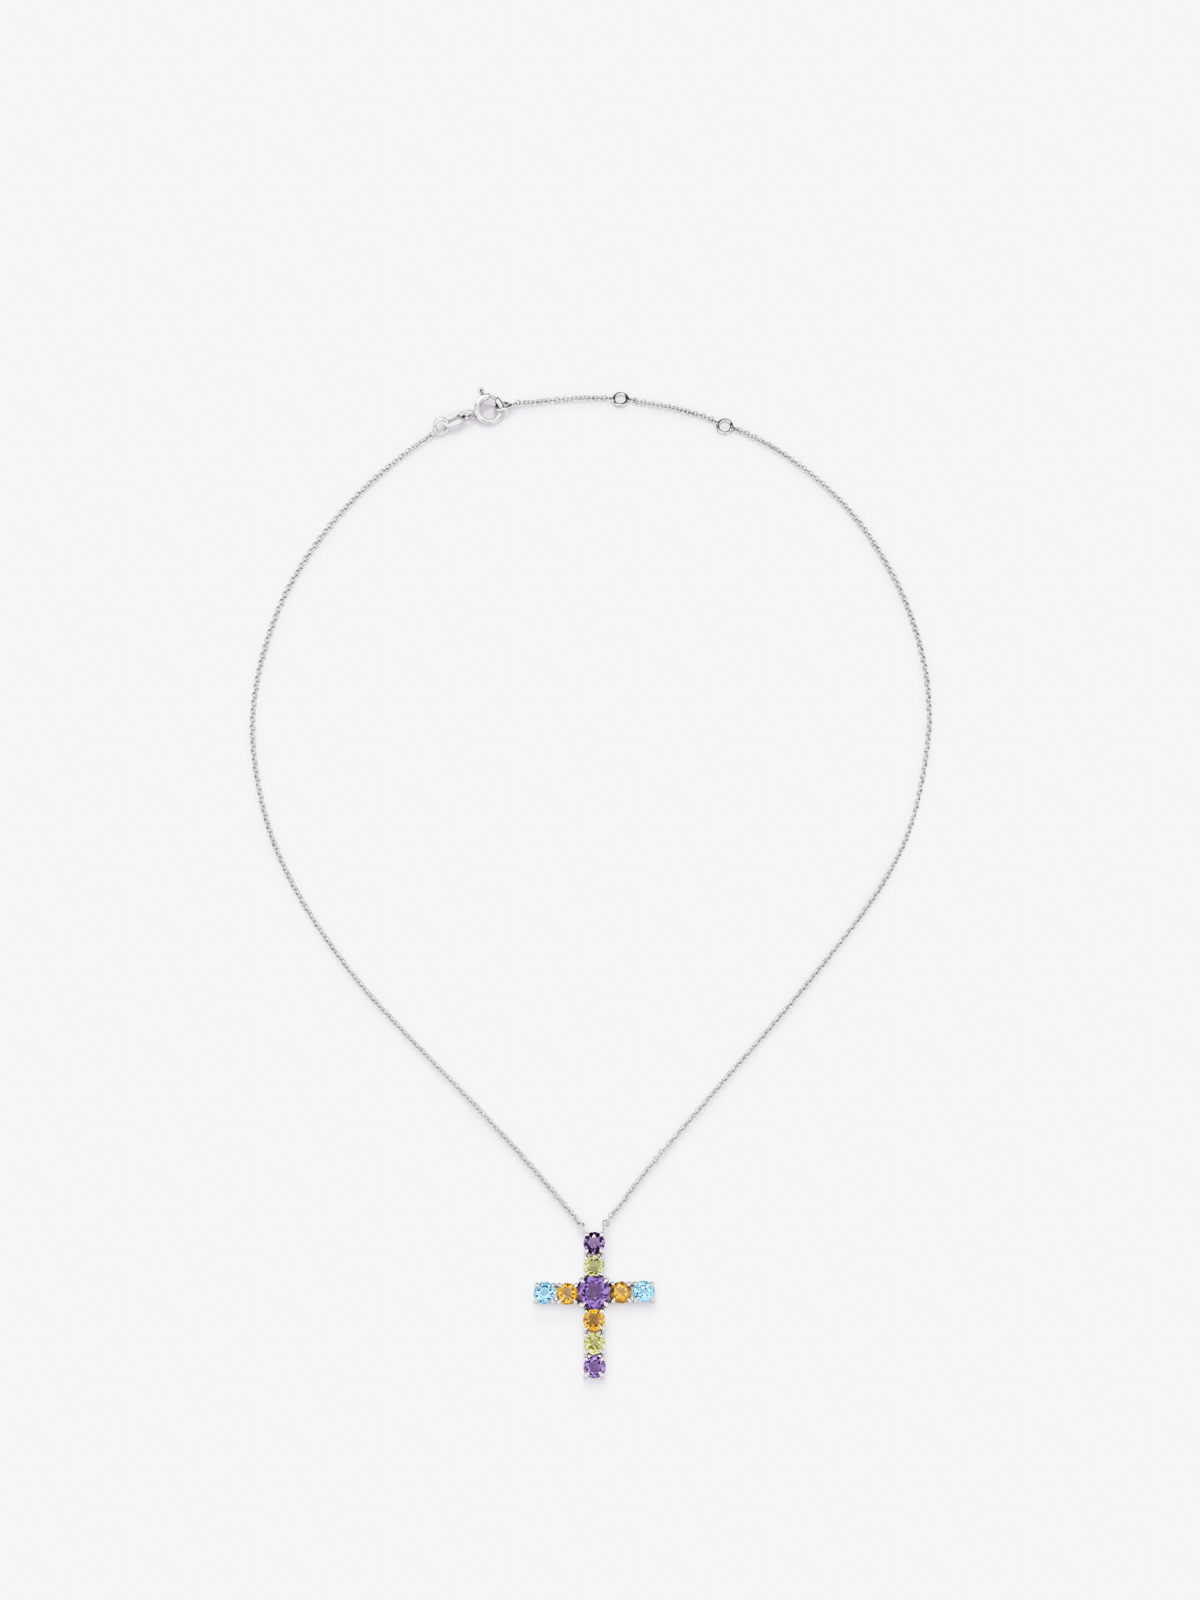 Pendant necklace with 925 silver cross and multicolor gems.